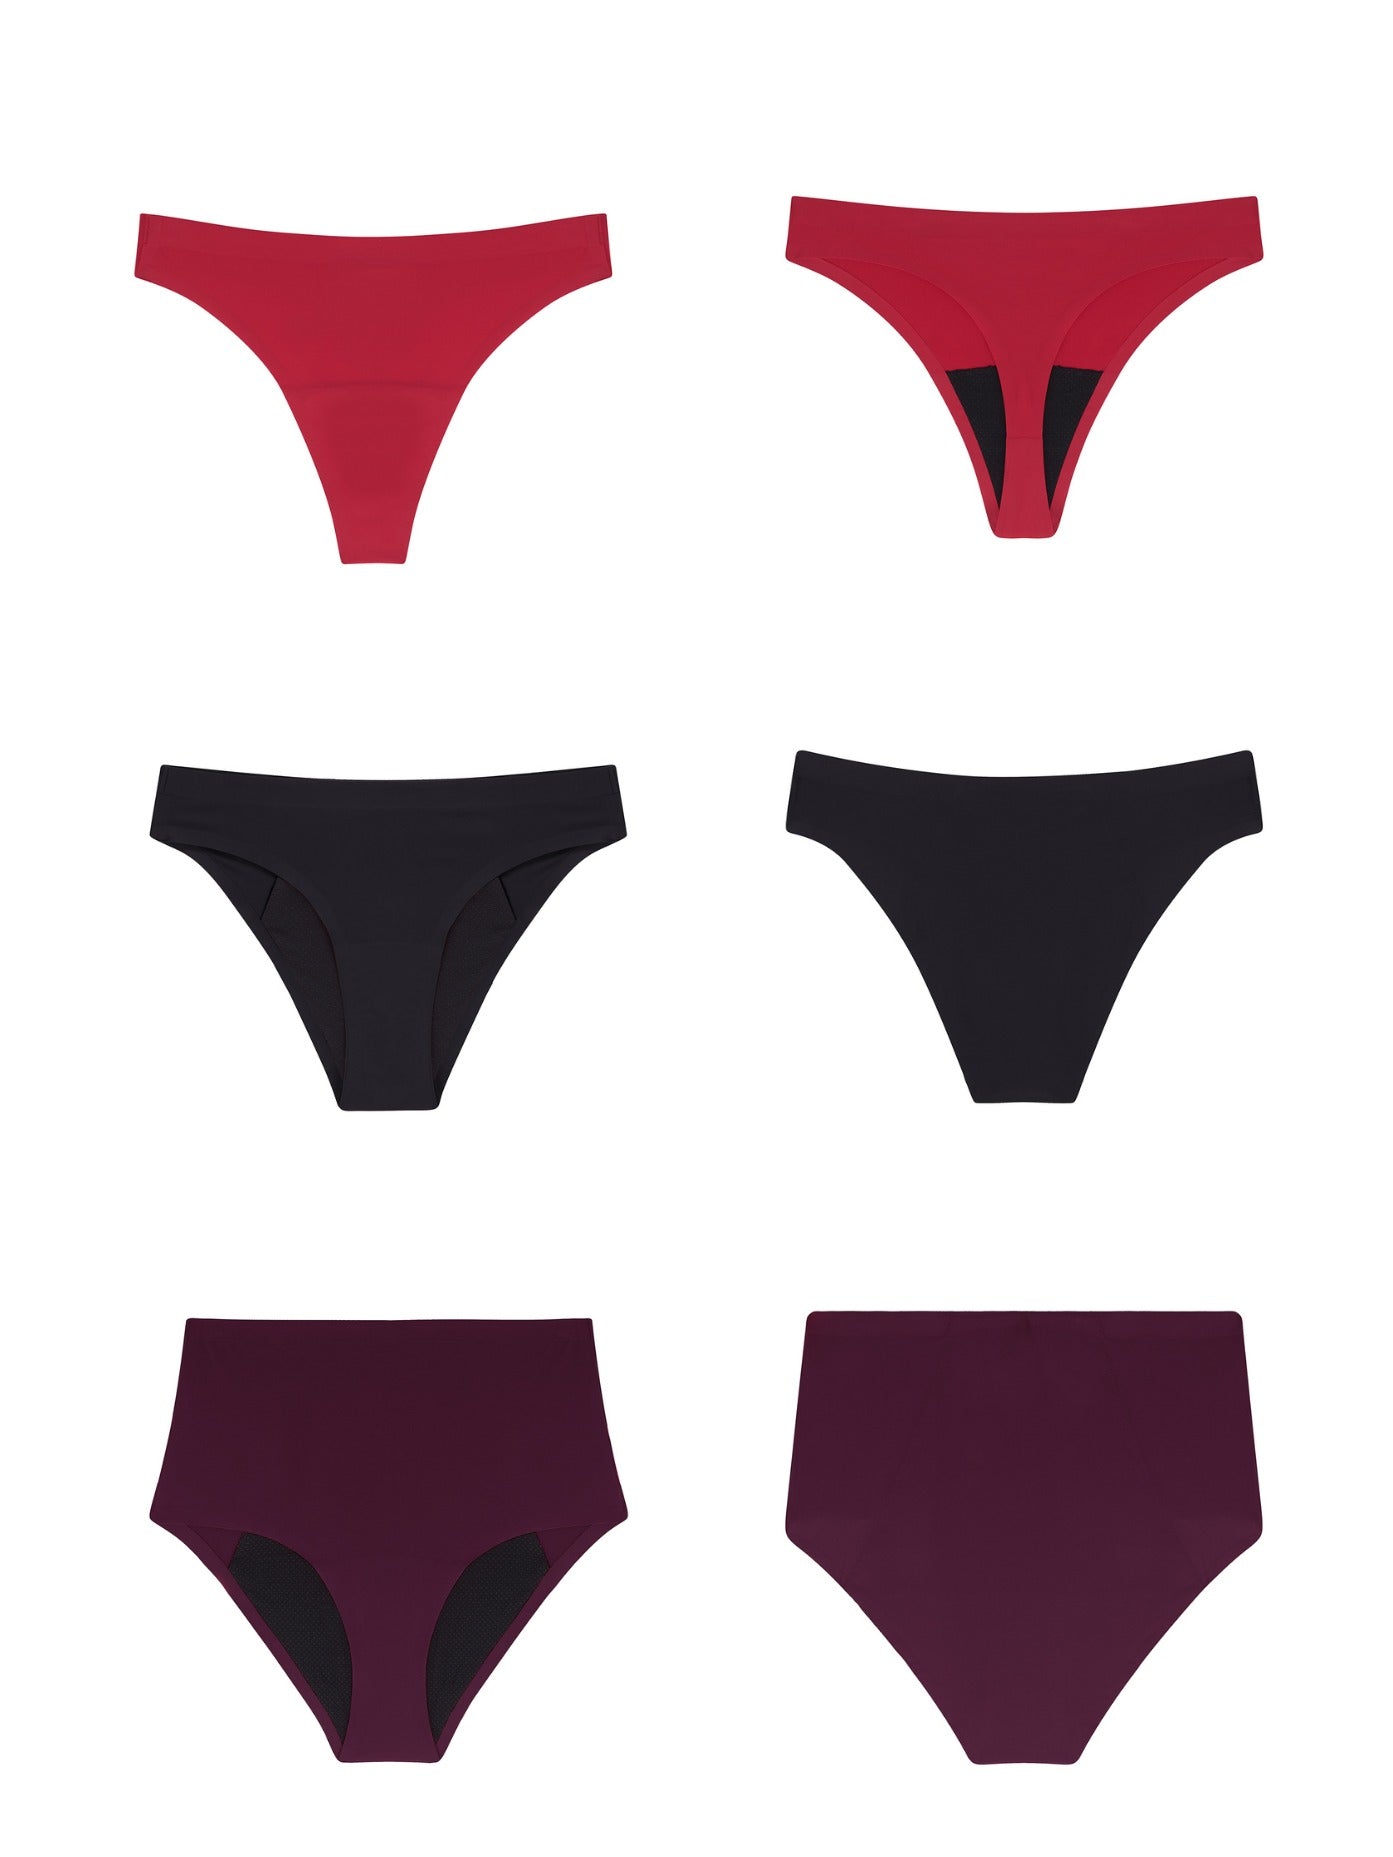 Period Pants & Knickers for All Flow Types